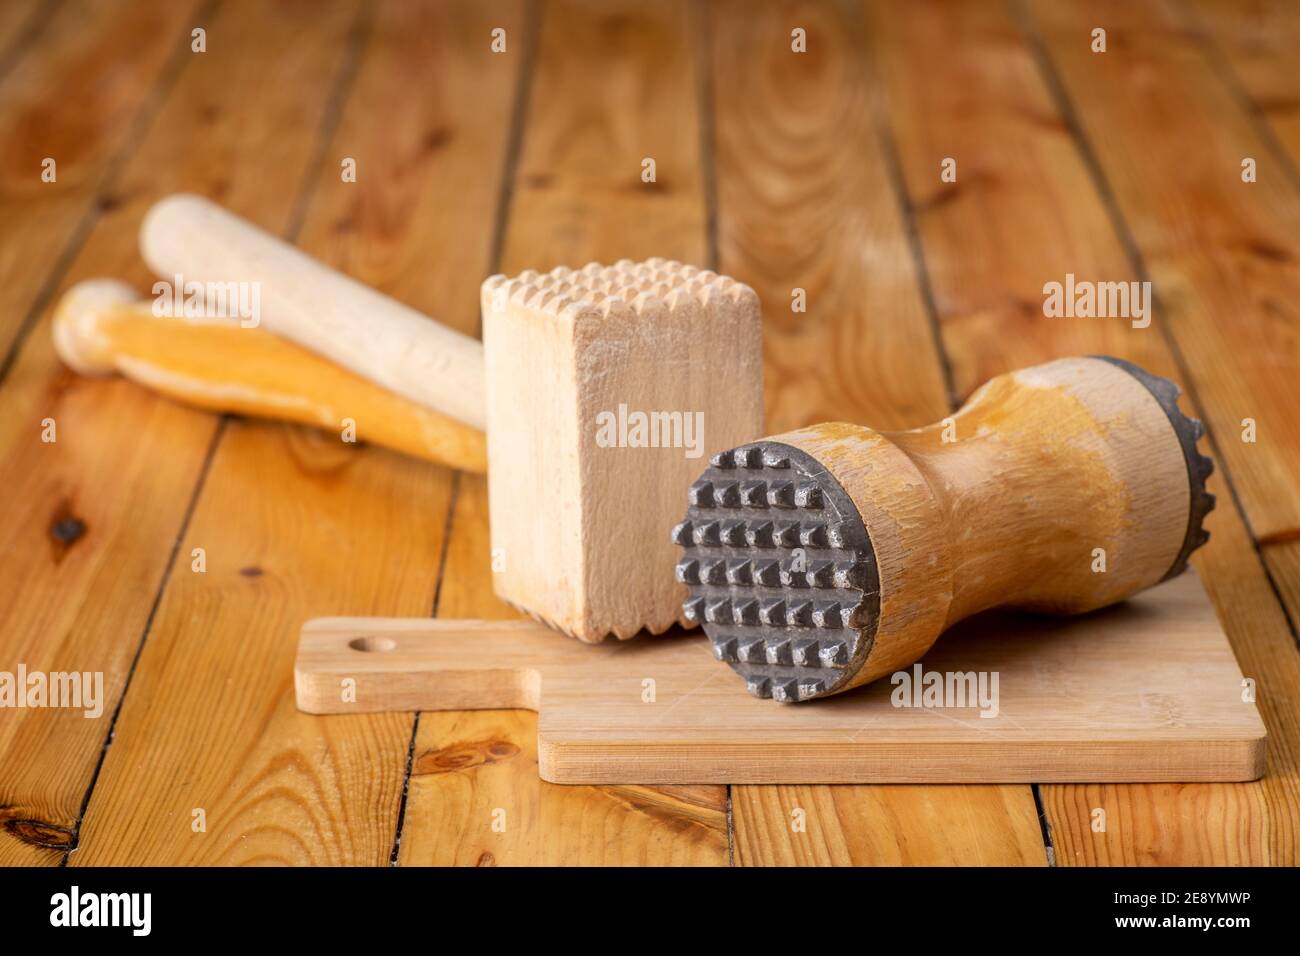 Wooden meat mashers. Wooden kitchen utensils on the kitchen table. Light background. Stock Photo